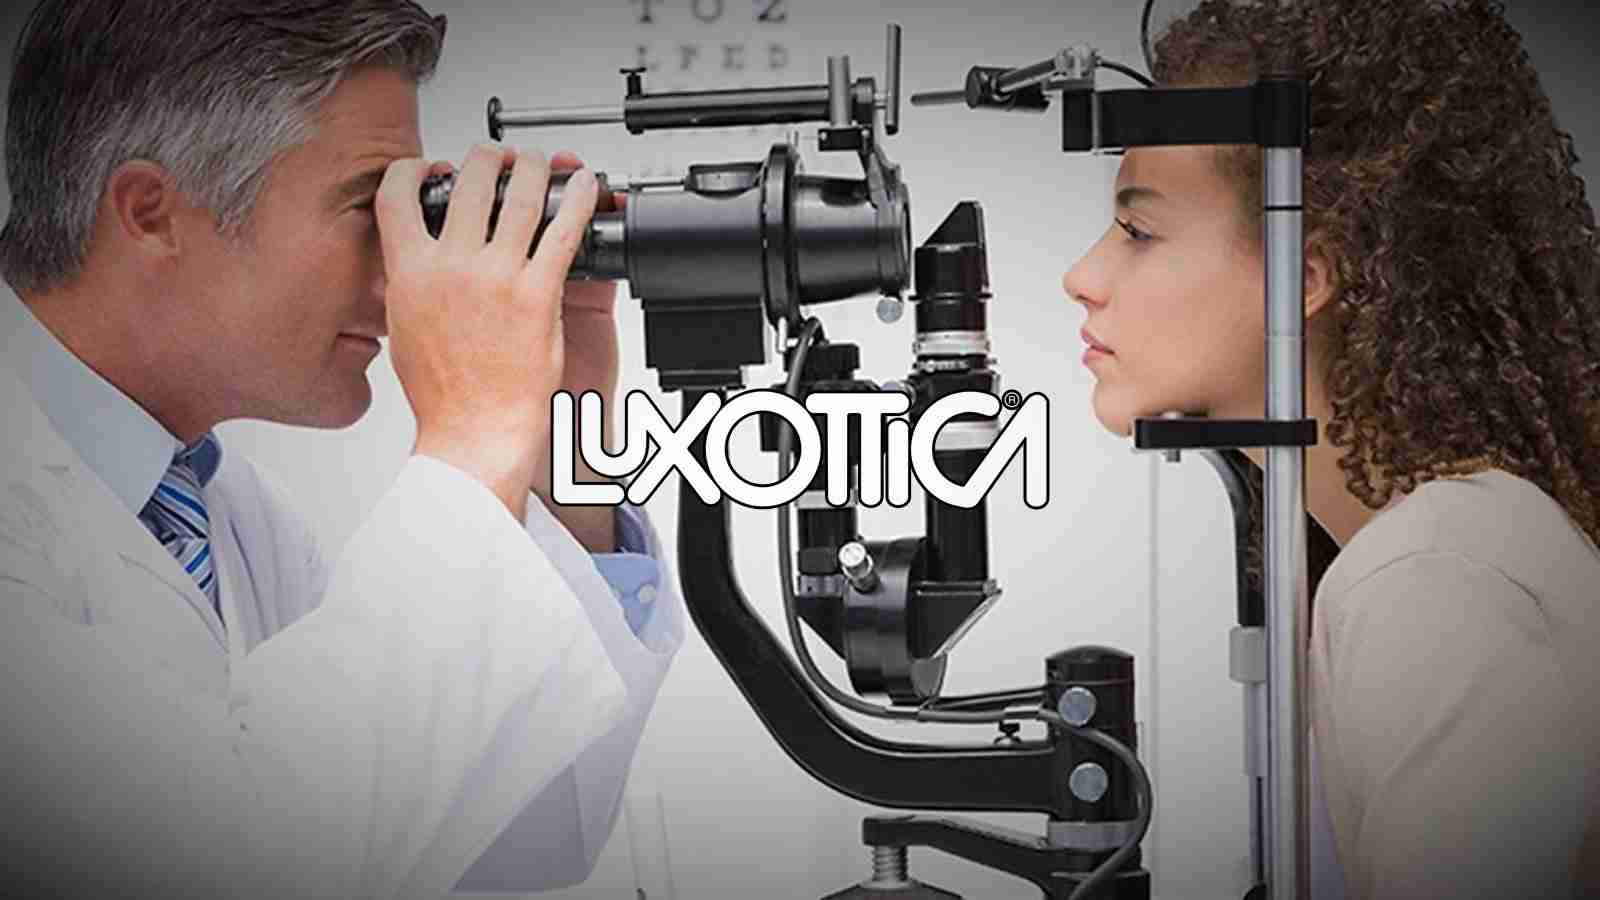 Luxottica Data Breach Exposes 820K EyeMed, LensCrafters Patients